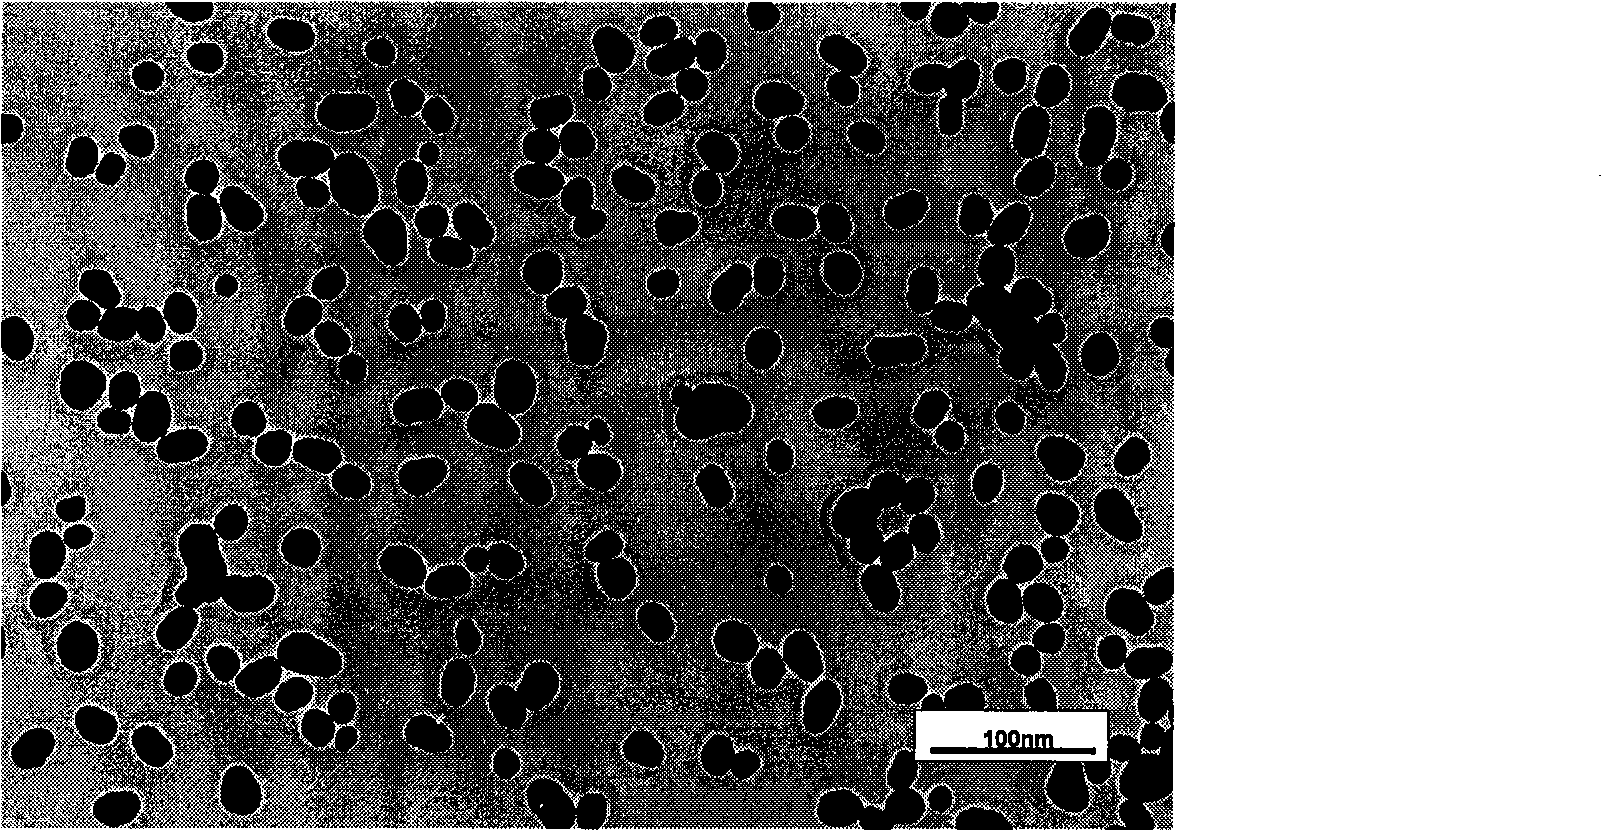 Preparation method of heparin modified gold nano-particles